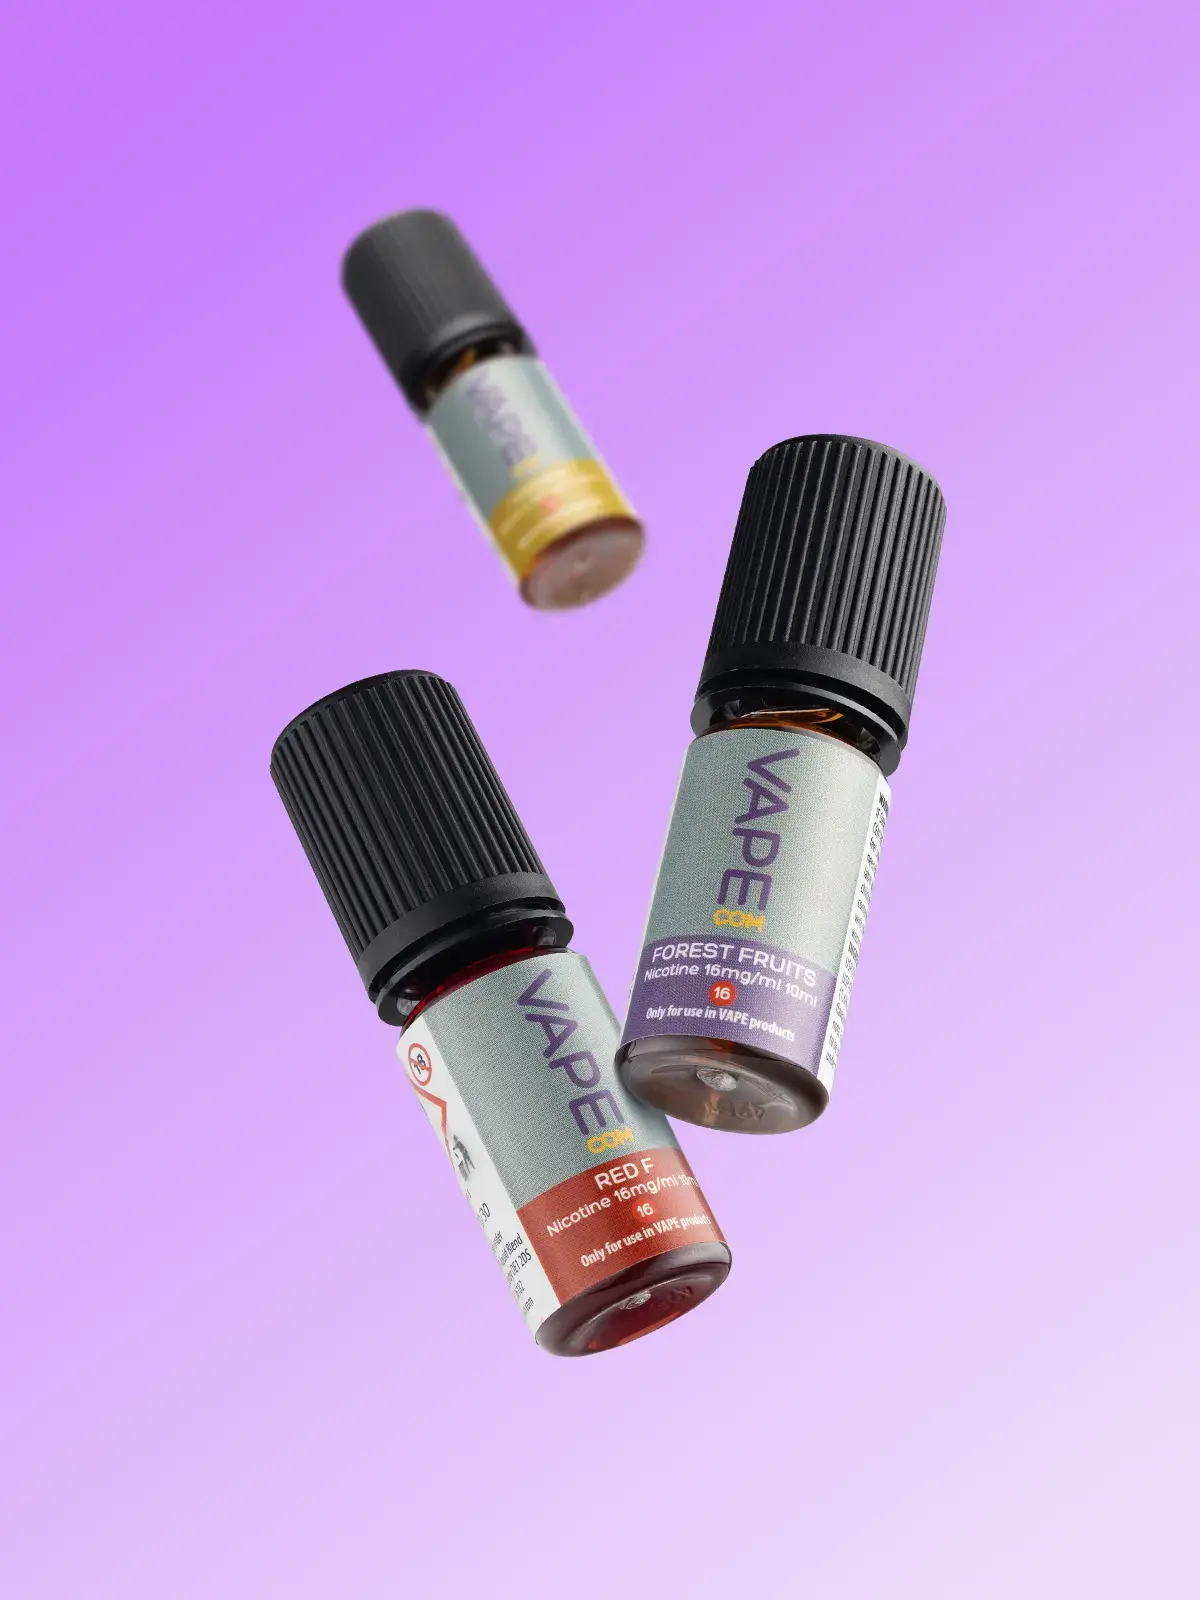 Three bottles of VapeCOM e-liquid including Red F and Forest Fruits, floating in front of a purple background